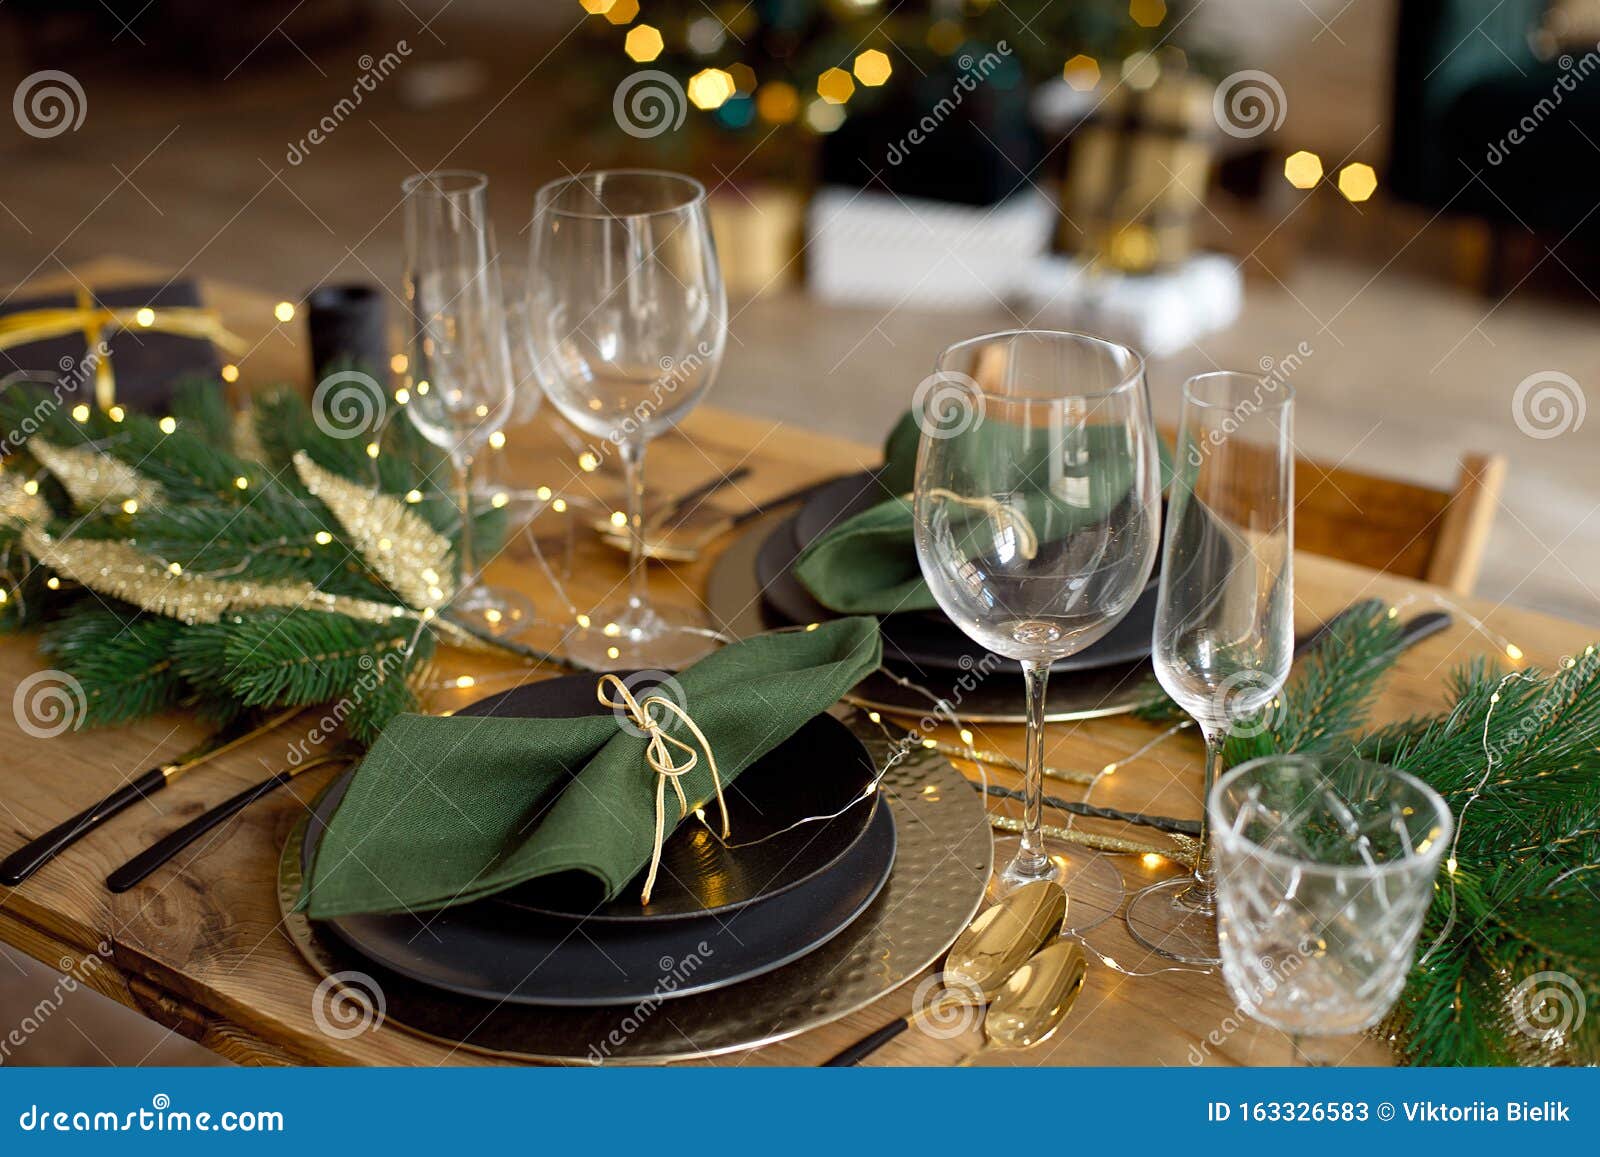 Table Served For Christmas Dinner In Living Room, Close-up View, Table